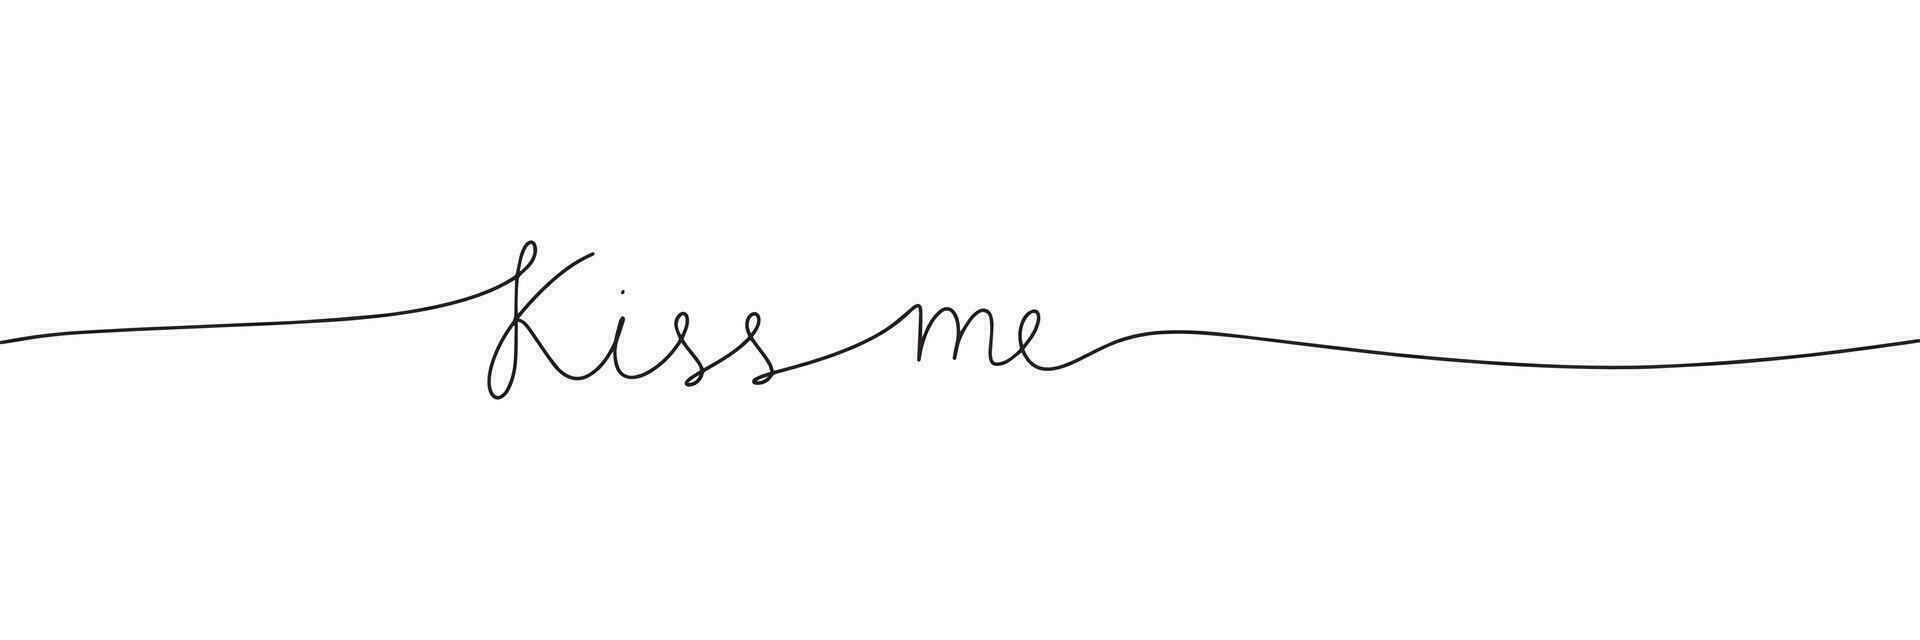 Kiss me word - continuous one line with word. Minimalistic drawing of phrase illustration. vector